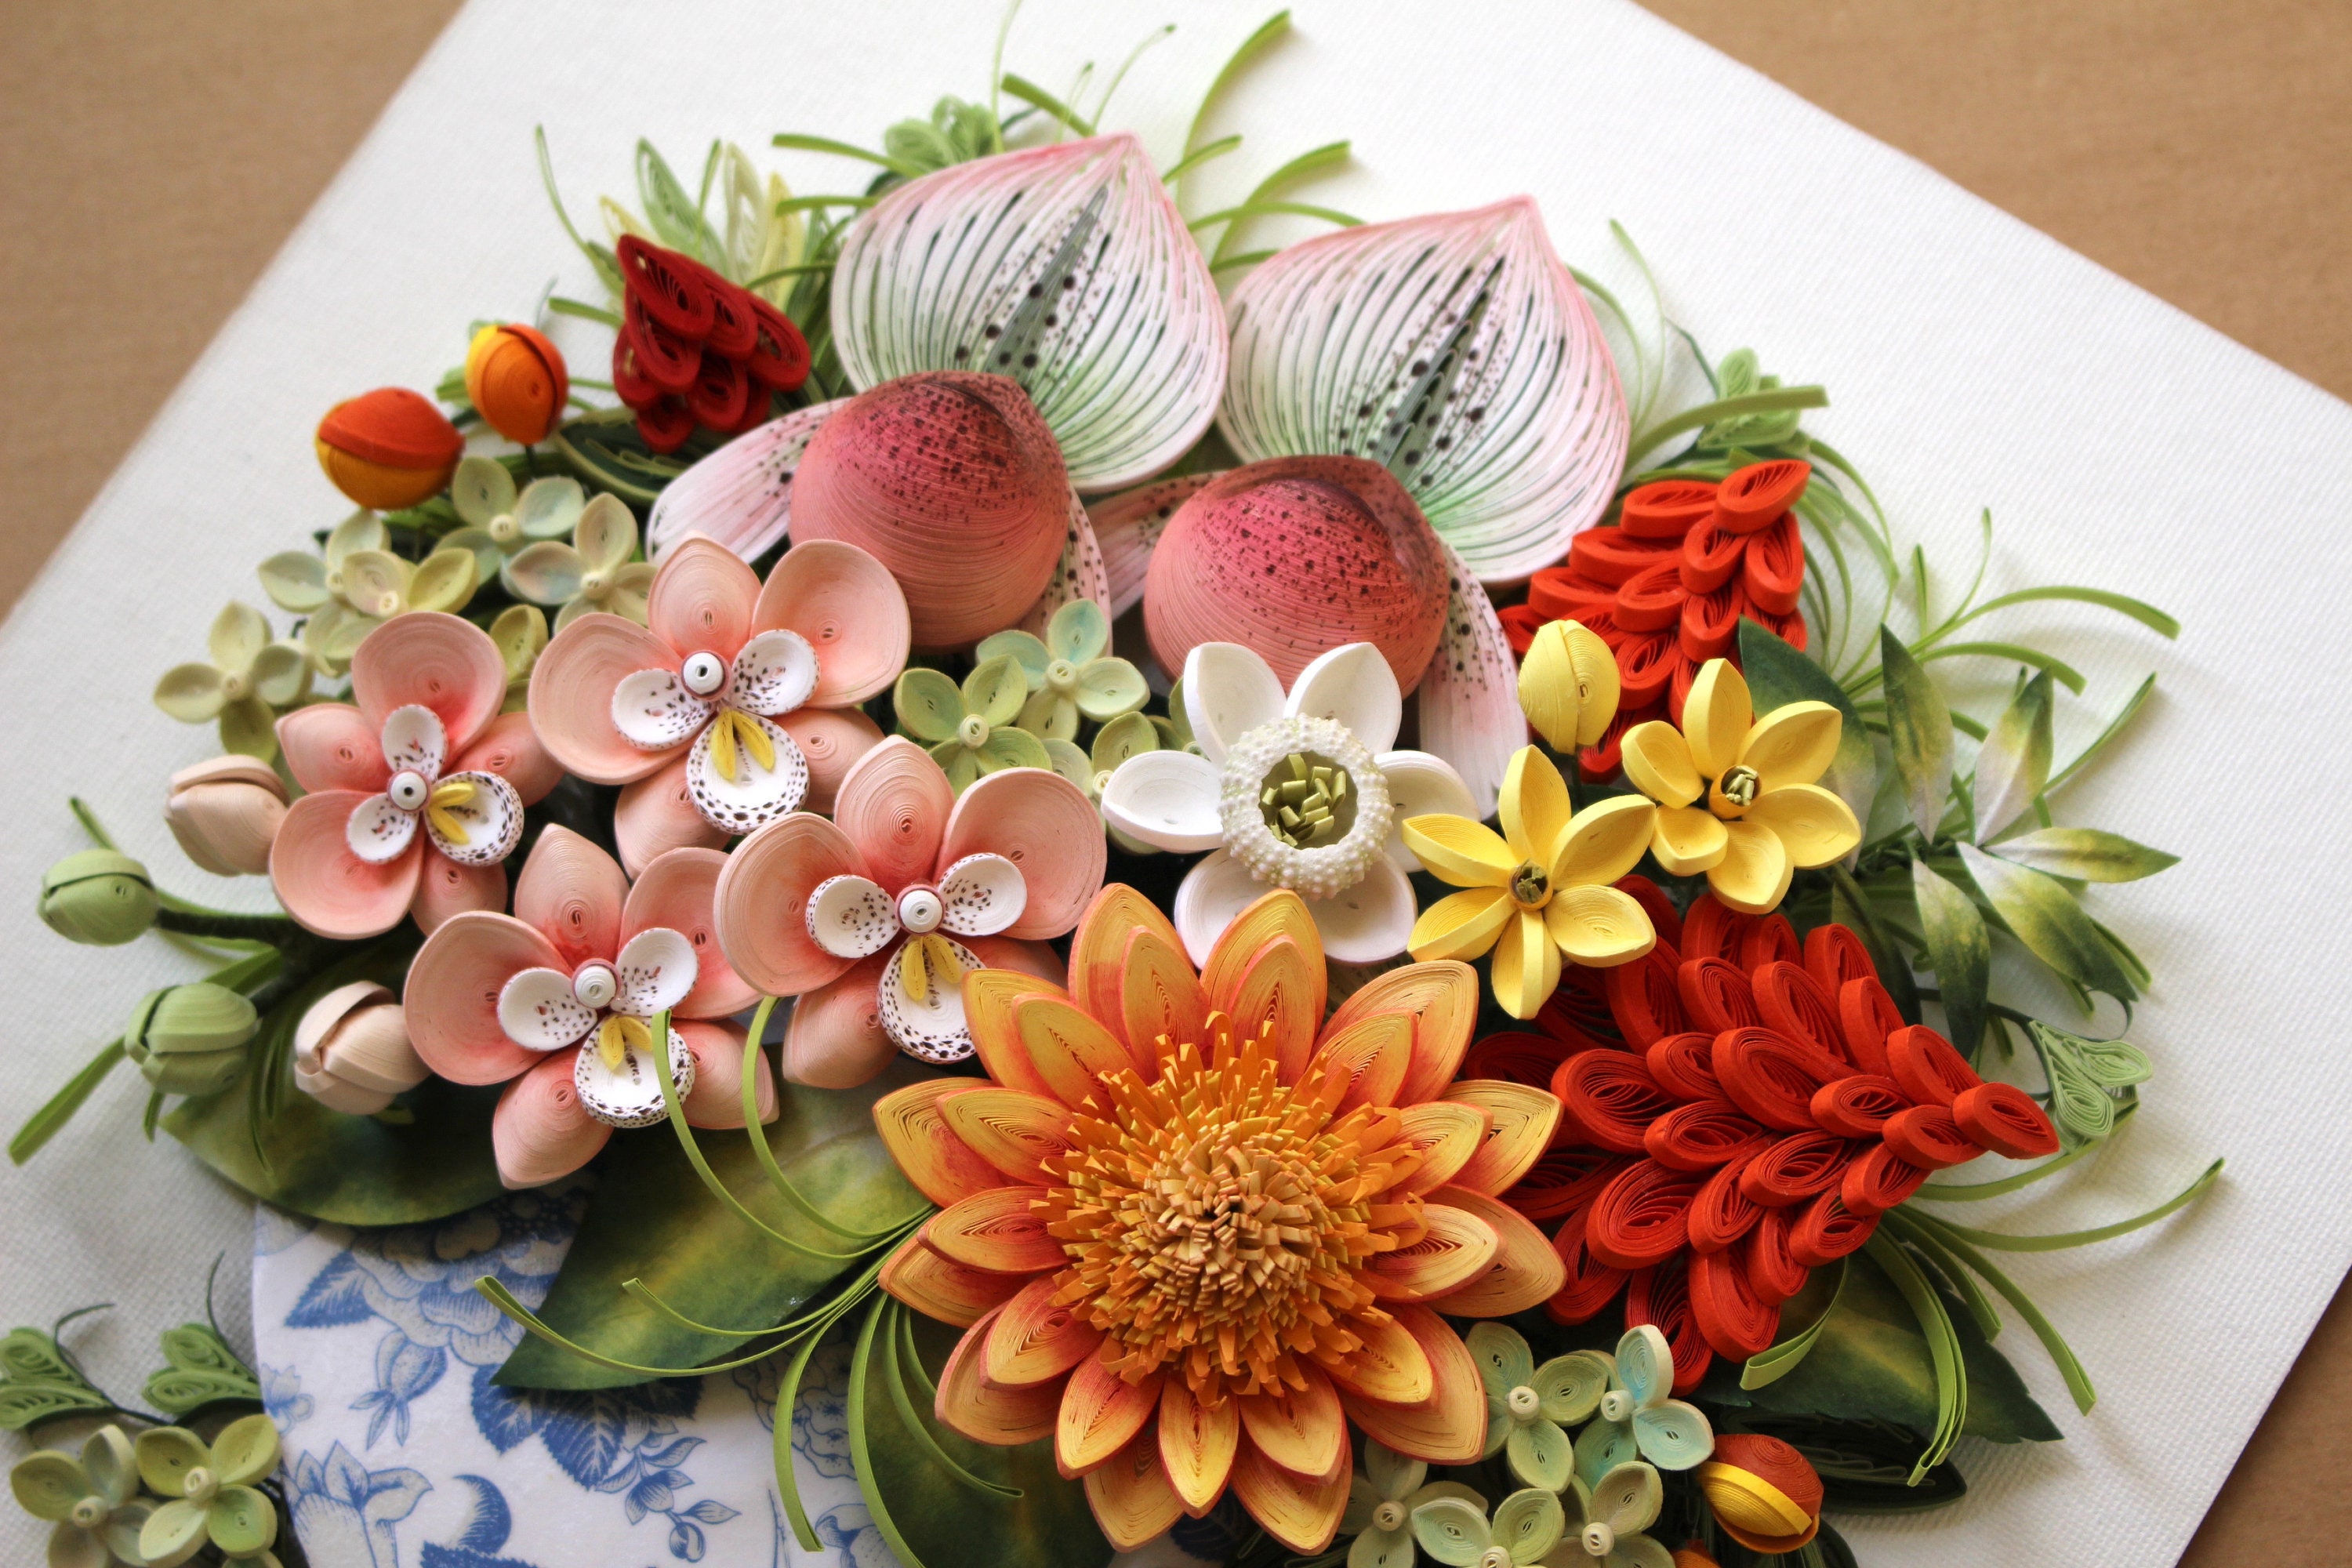 Let's Enjoy Flowers Anc Colors PAPER QUILLING by Motoko Maggie Nakatani  Japanese Craft Book 